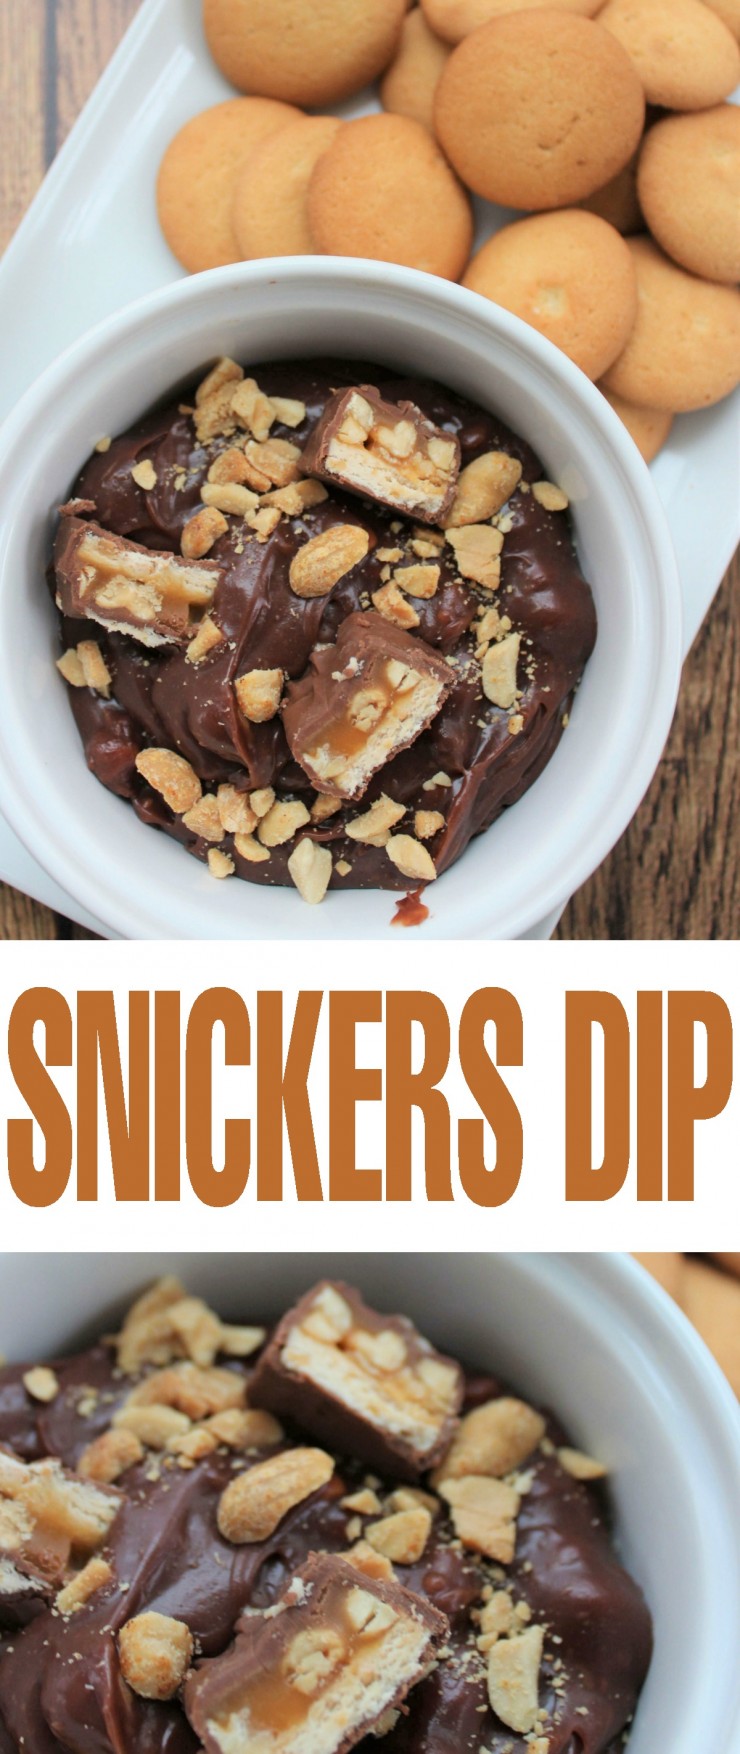 This snickers dip is a delicious treat to serve guests, and a fabulous way to use up some of that Halloween candy!